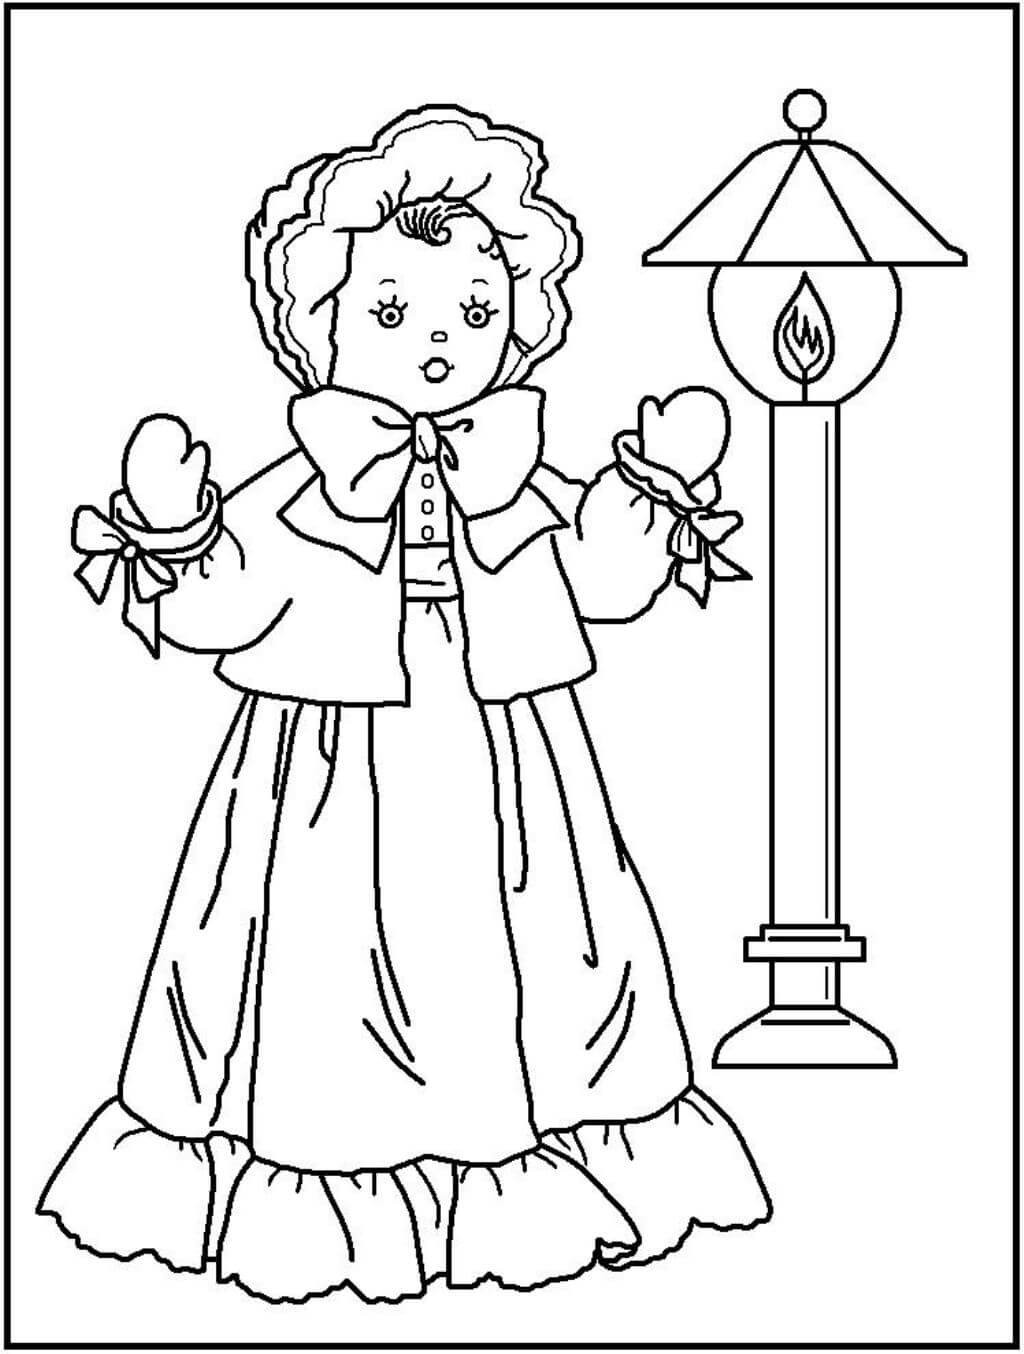 Free American Girl Coloring Pages
 Coloring Pages American Girl Doll